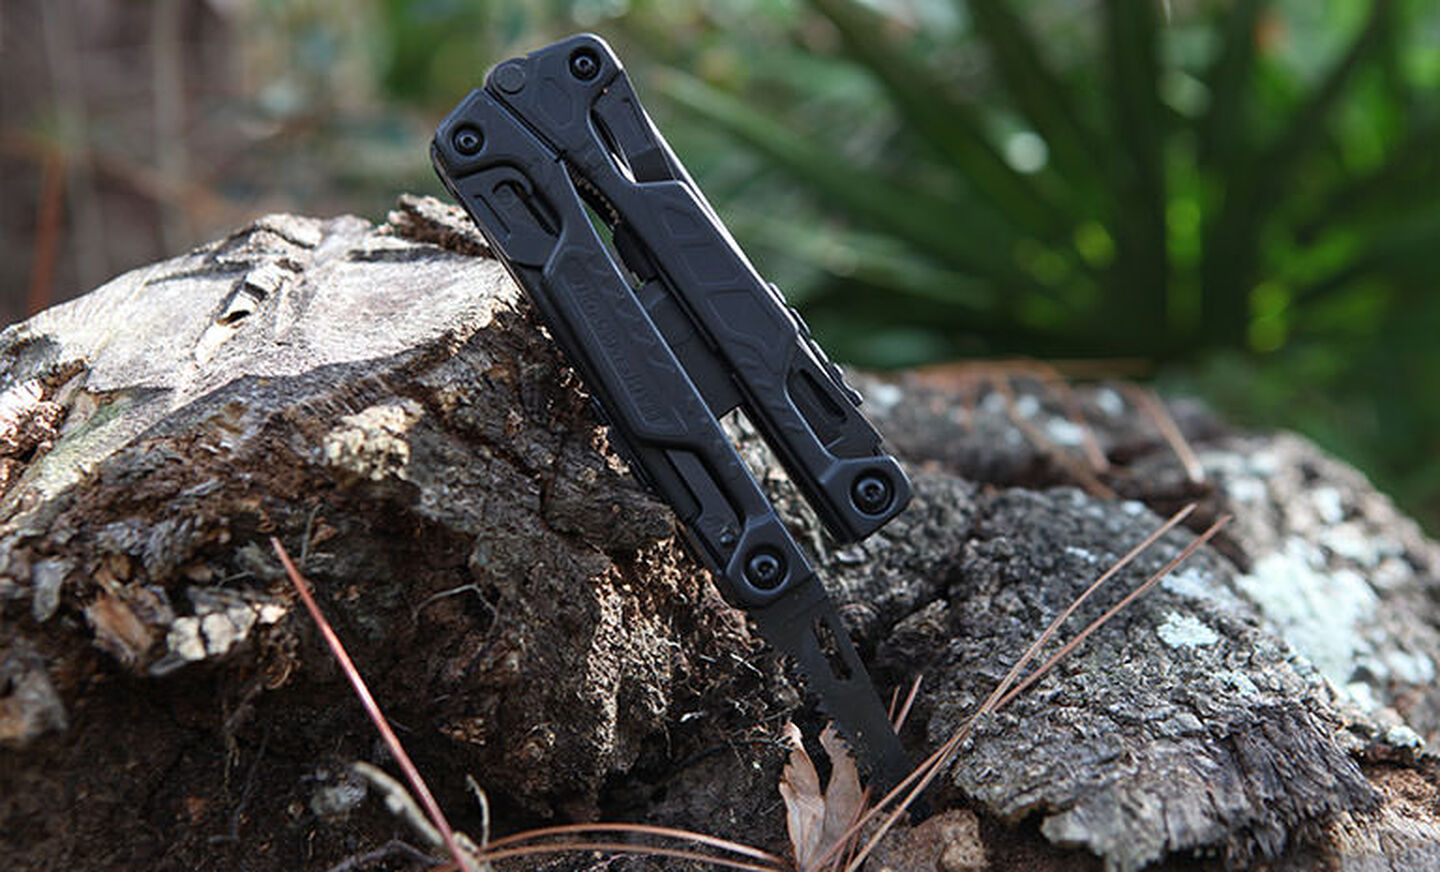 Black Leatherman OHT saw blade inside a piece of wood outdoors 